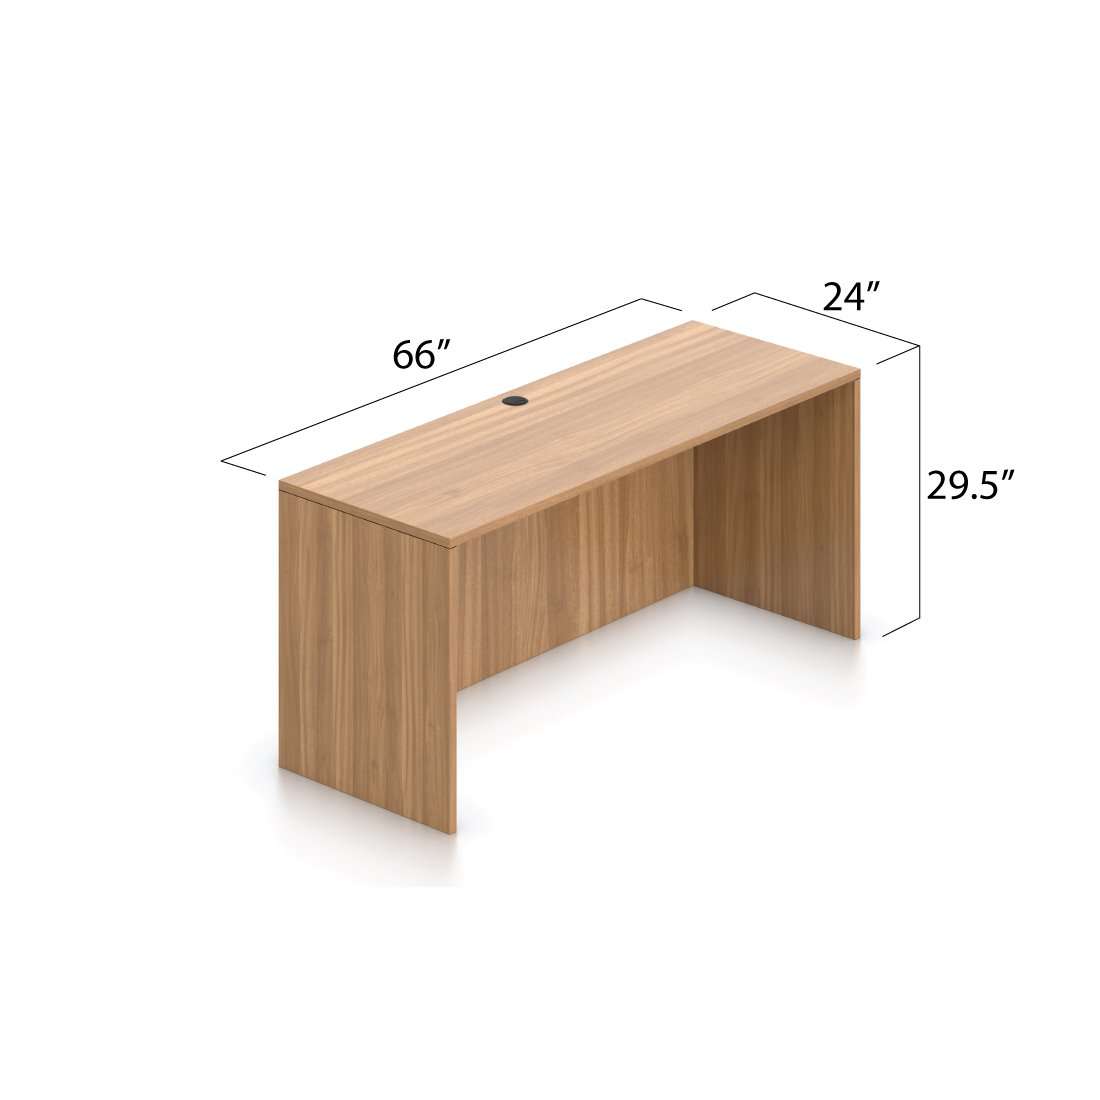 L66D - 5.5' x 6' L-Shape Workstation(Credenza Shell with Two Hanging B/F Pedestal) - Kainosbuy.com